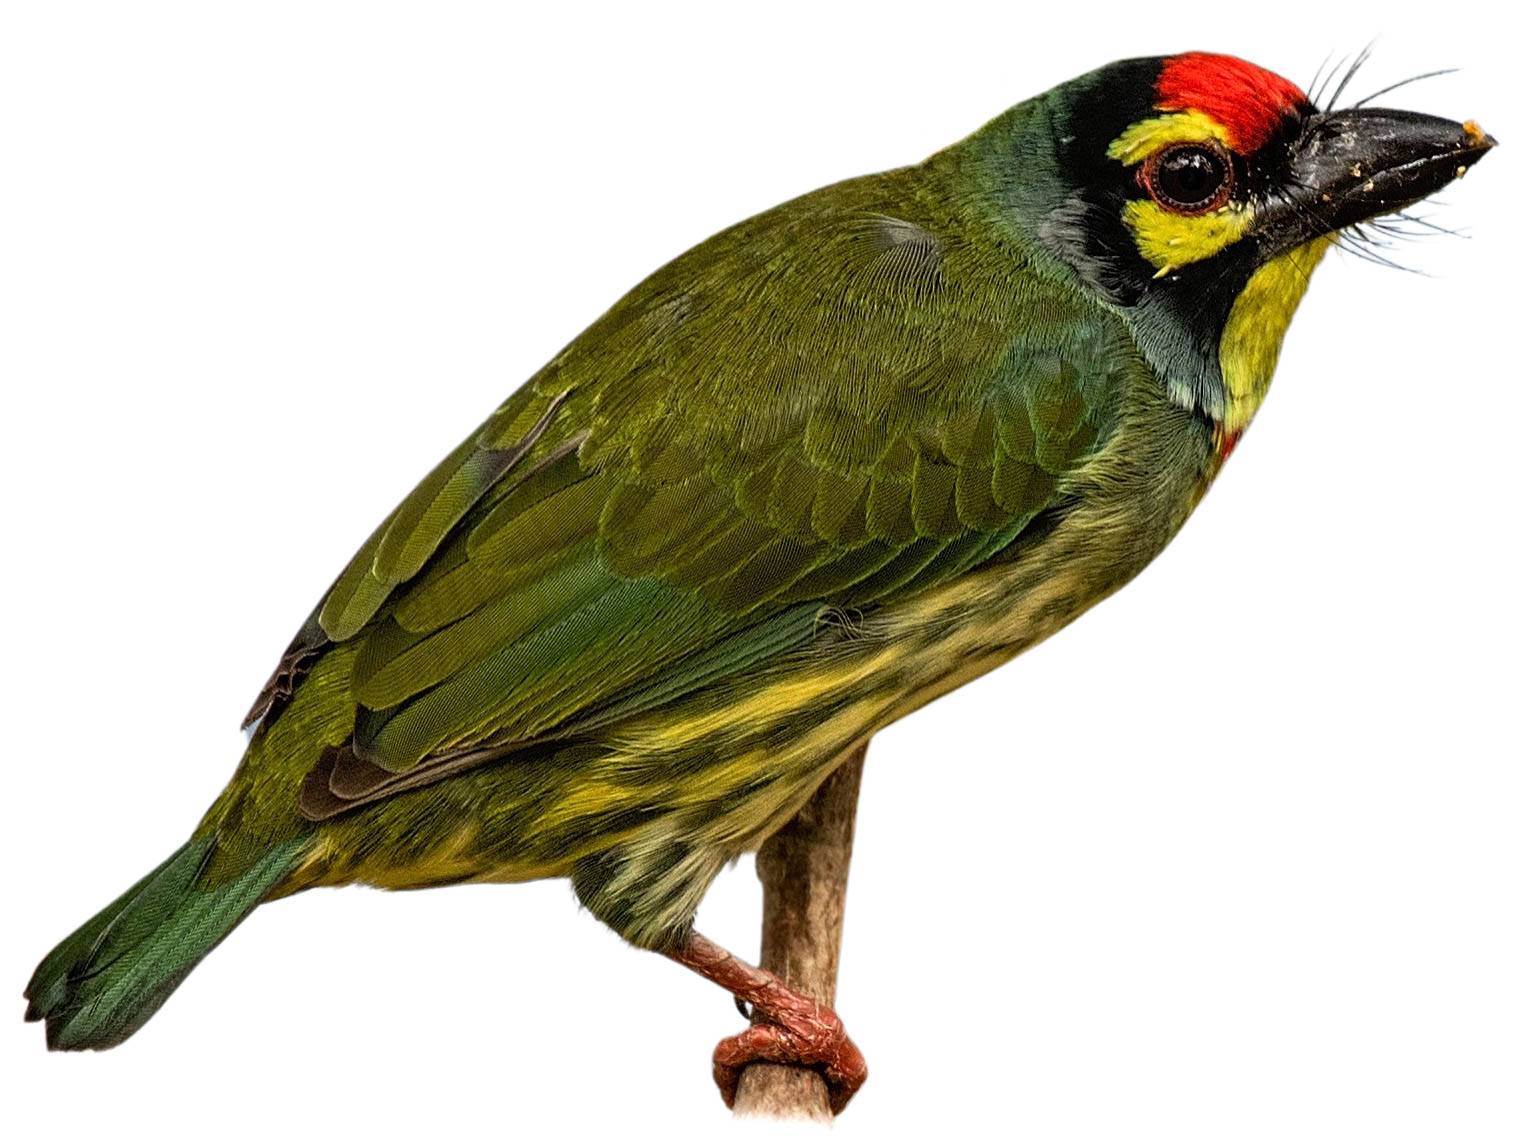 A photo of a Coppersmith Barbet (Psilopogon haemacephalus)